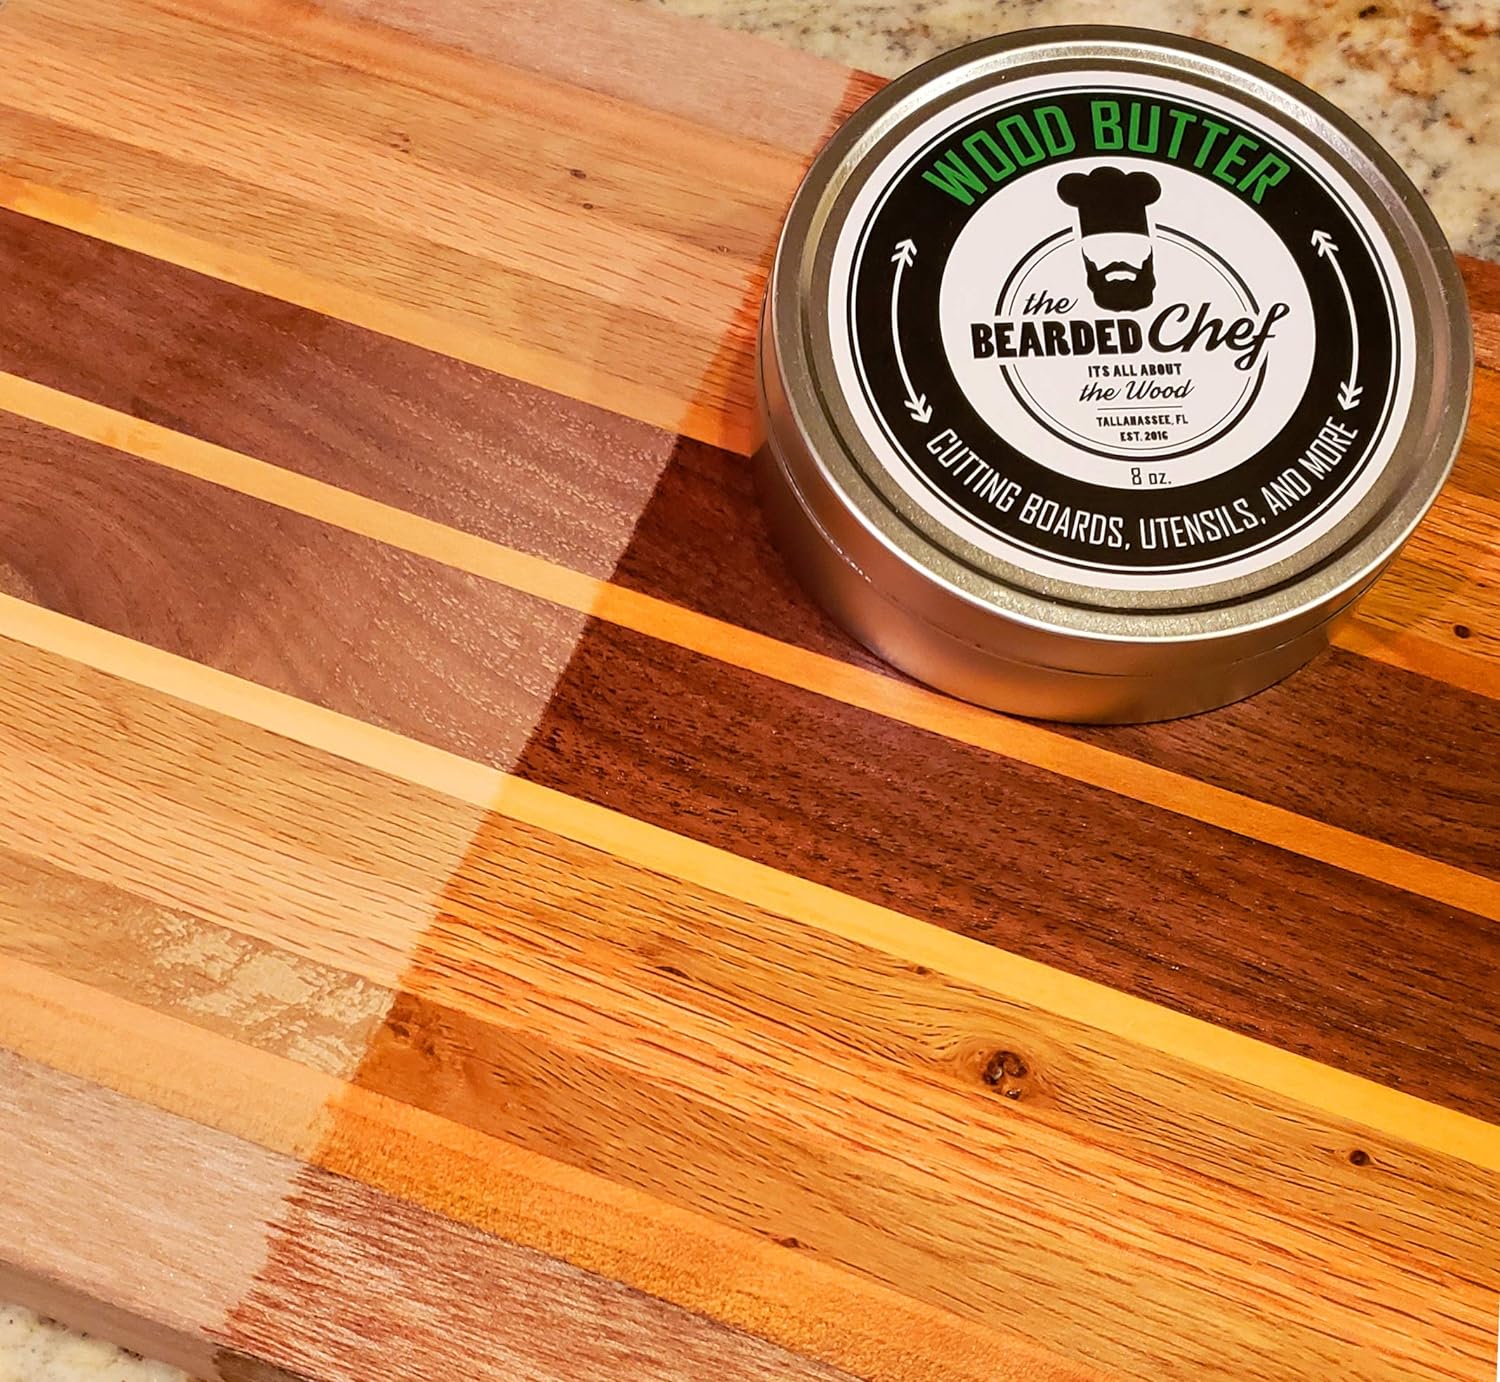 Wood Butter - 8 oz. - Cutting Boards - Butcher Blocks - Veteran Owned - Made in the USA : Health & Household